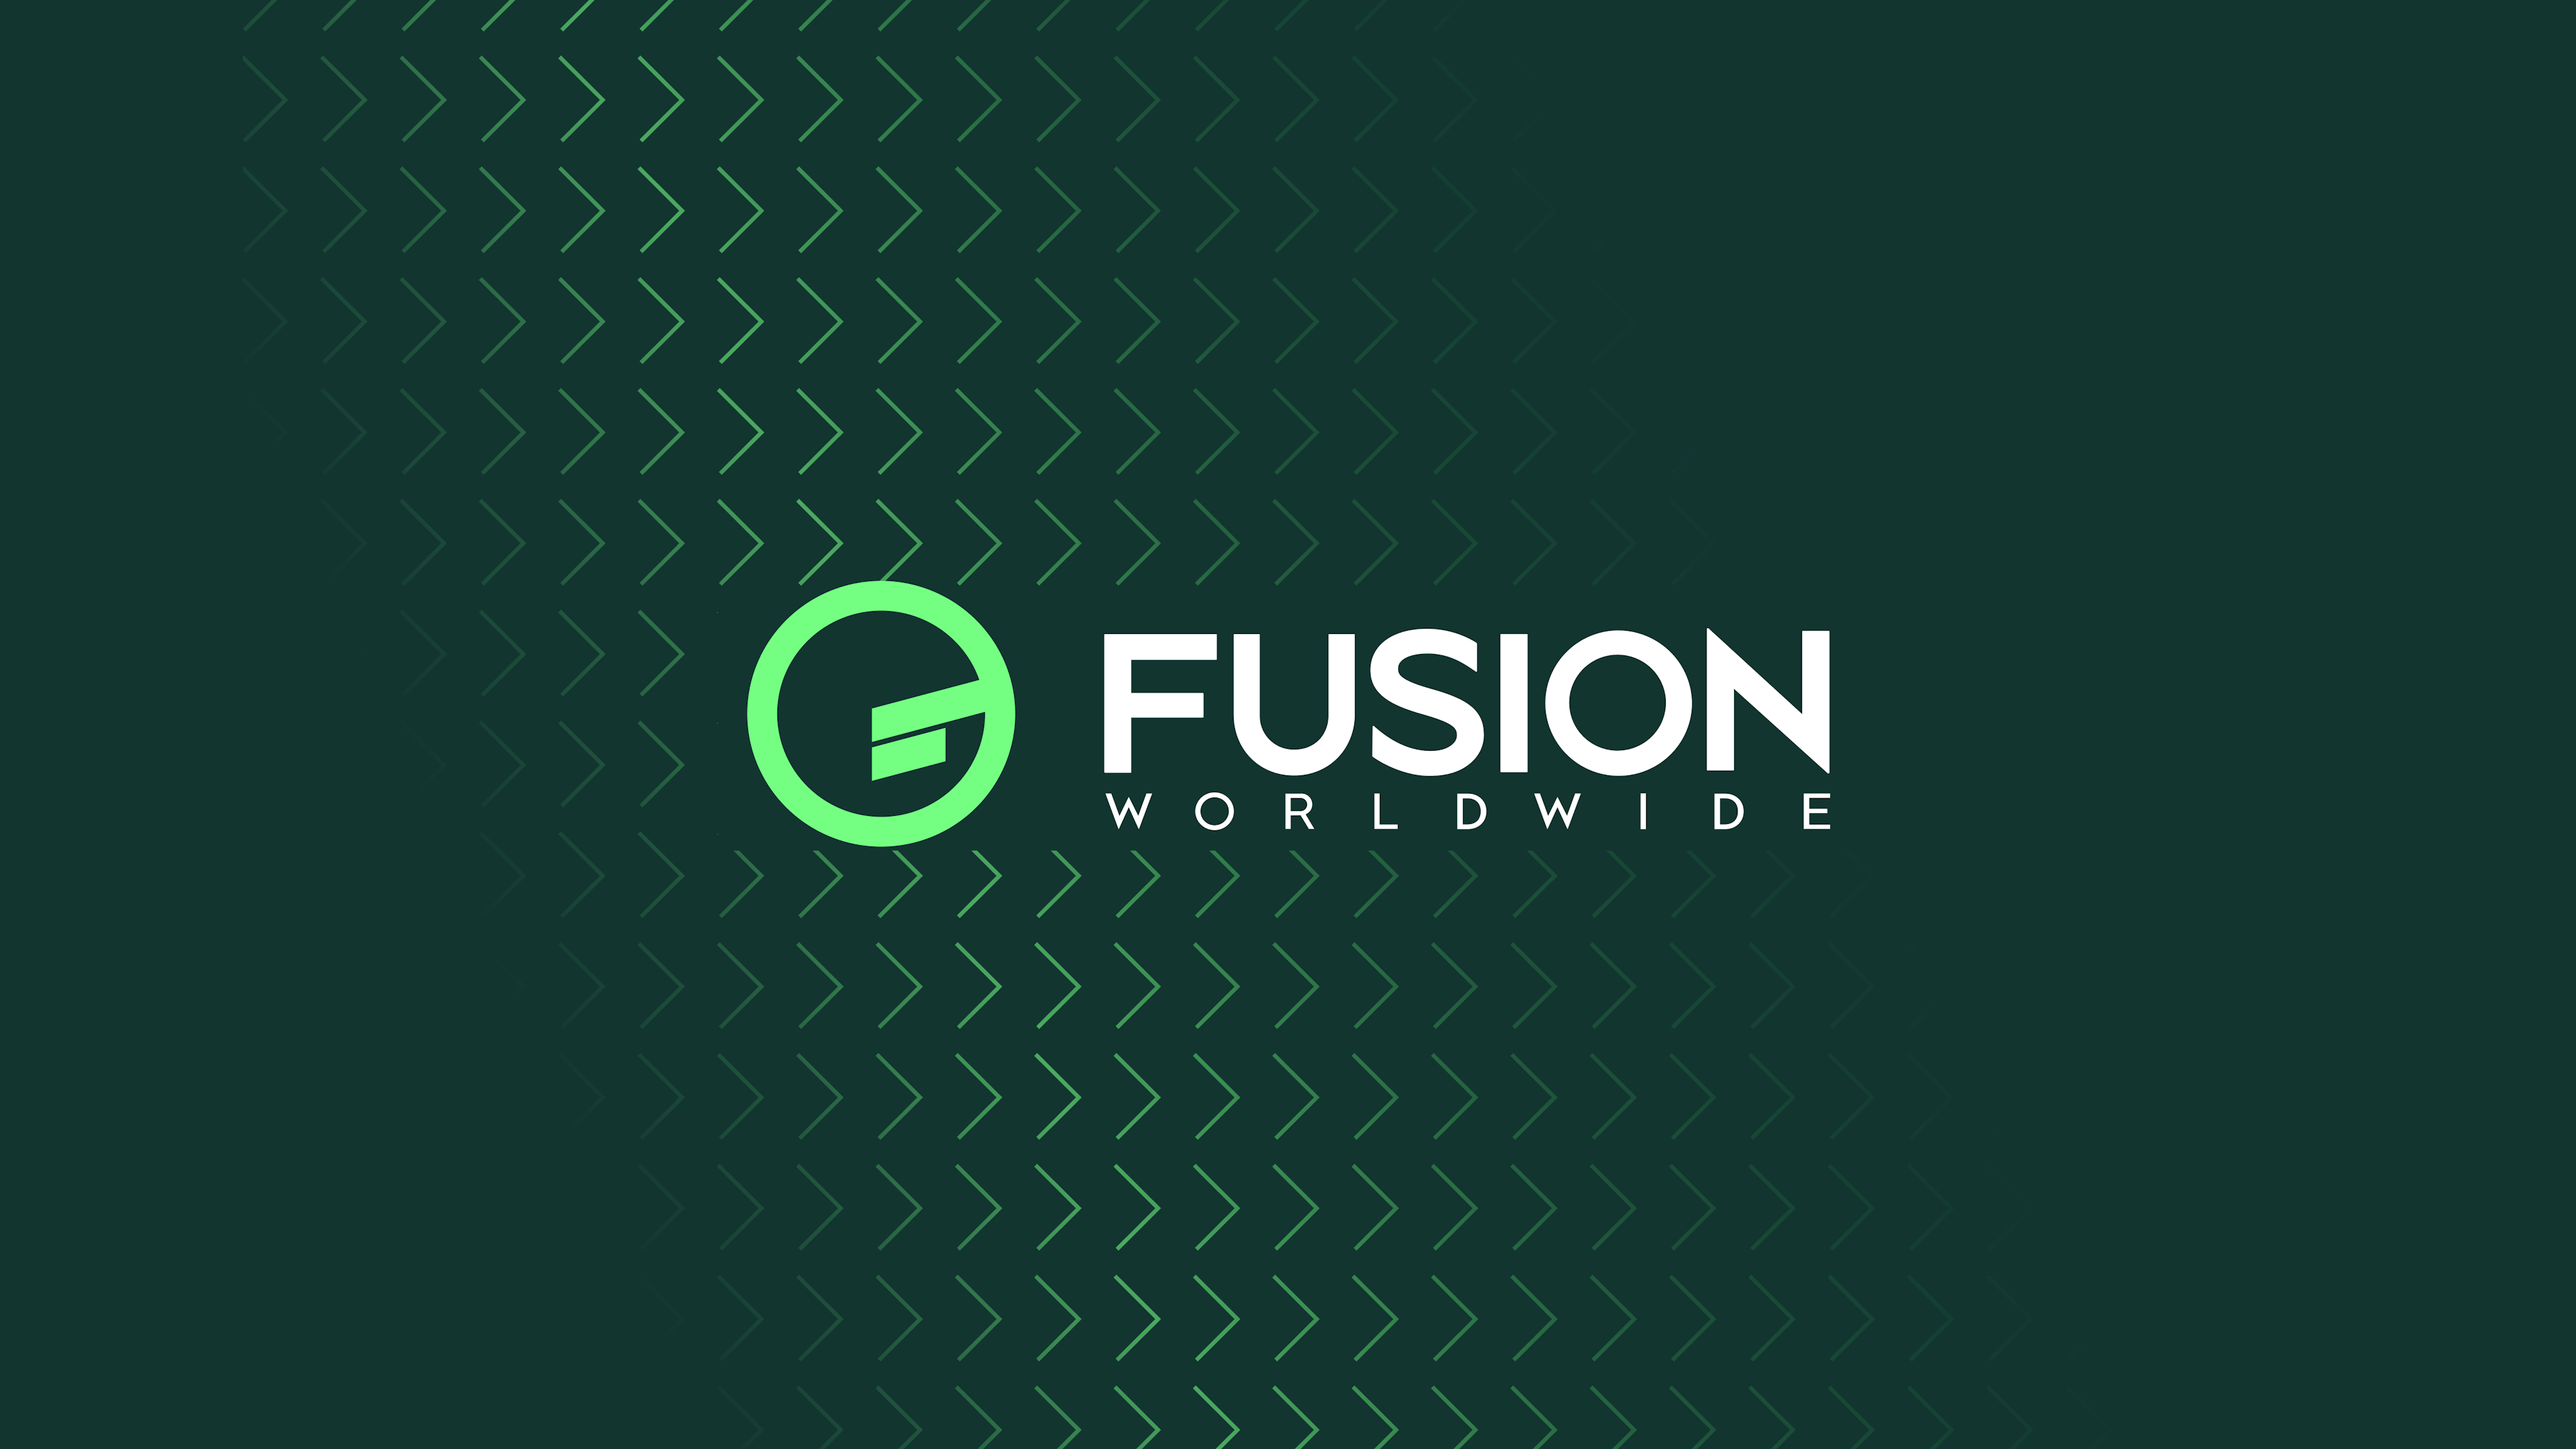 Fusion logo over a patterned green background